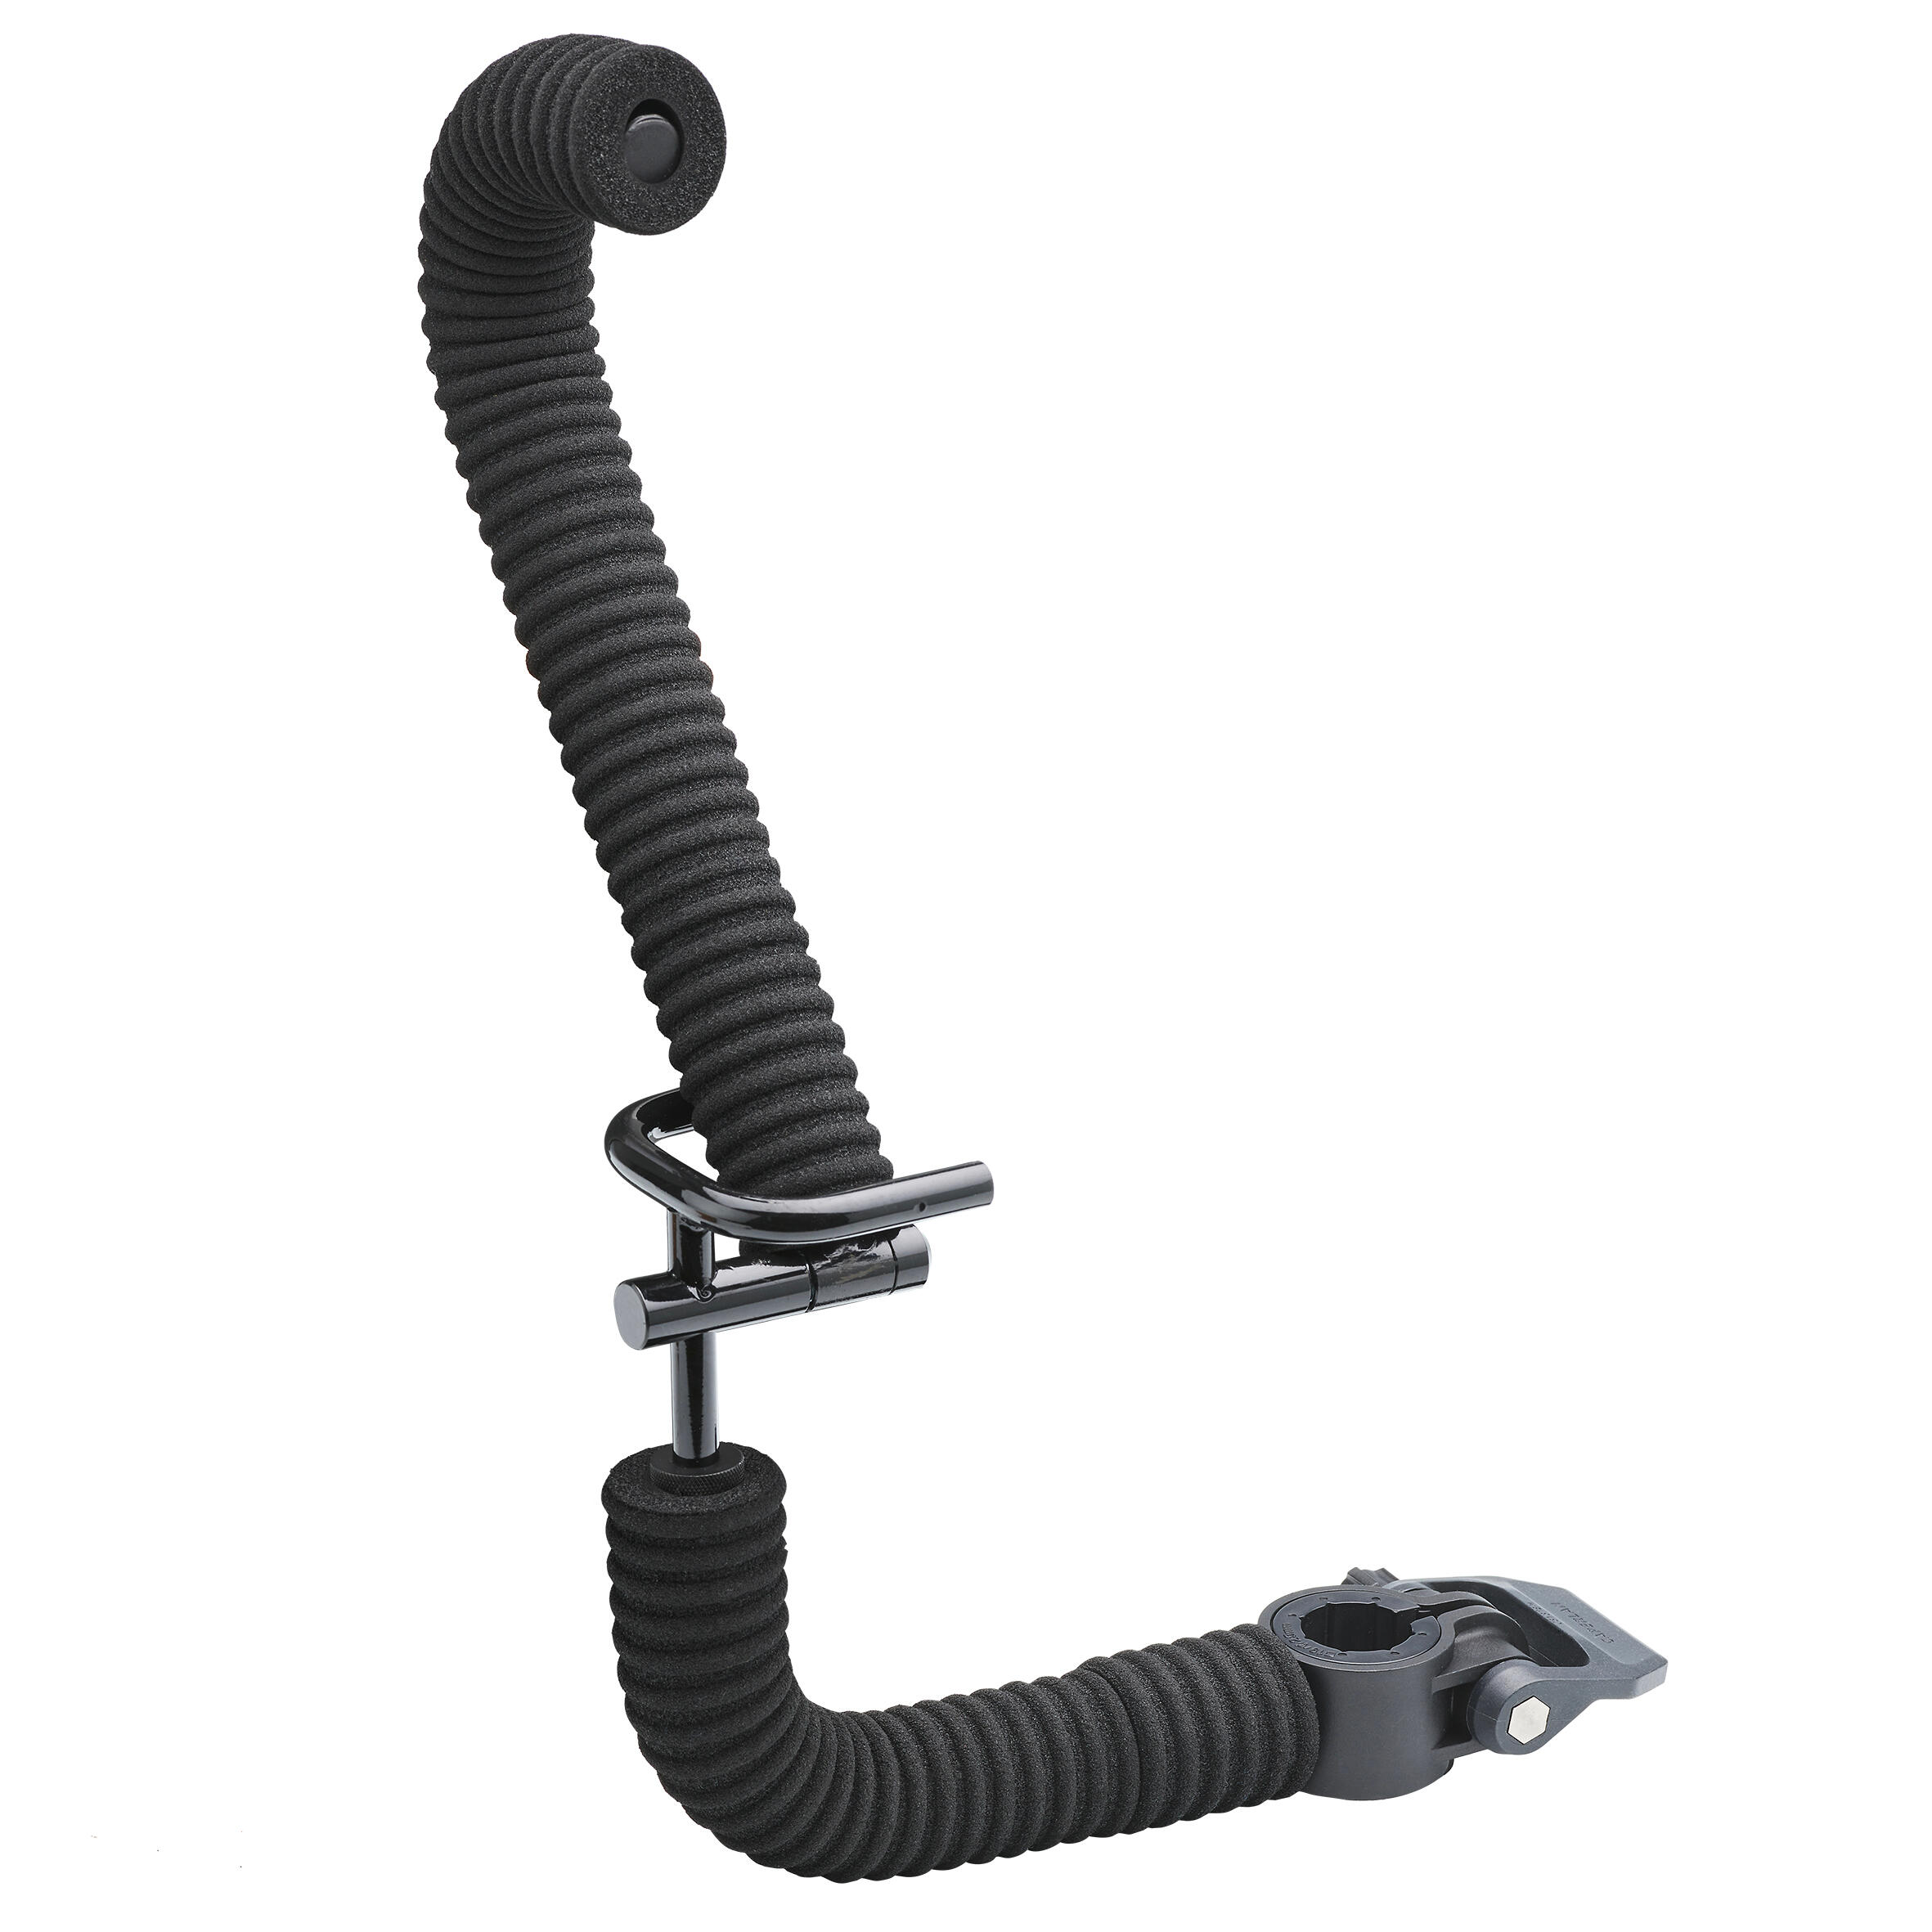 CAPERLAN INNOVATIVE REAR ROD REST FOR CSB BPS D25 D36 FISHING STATIONS